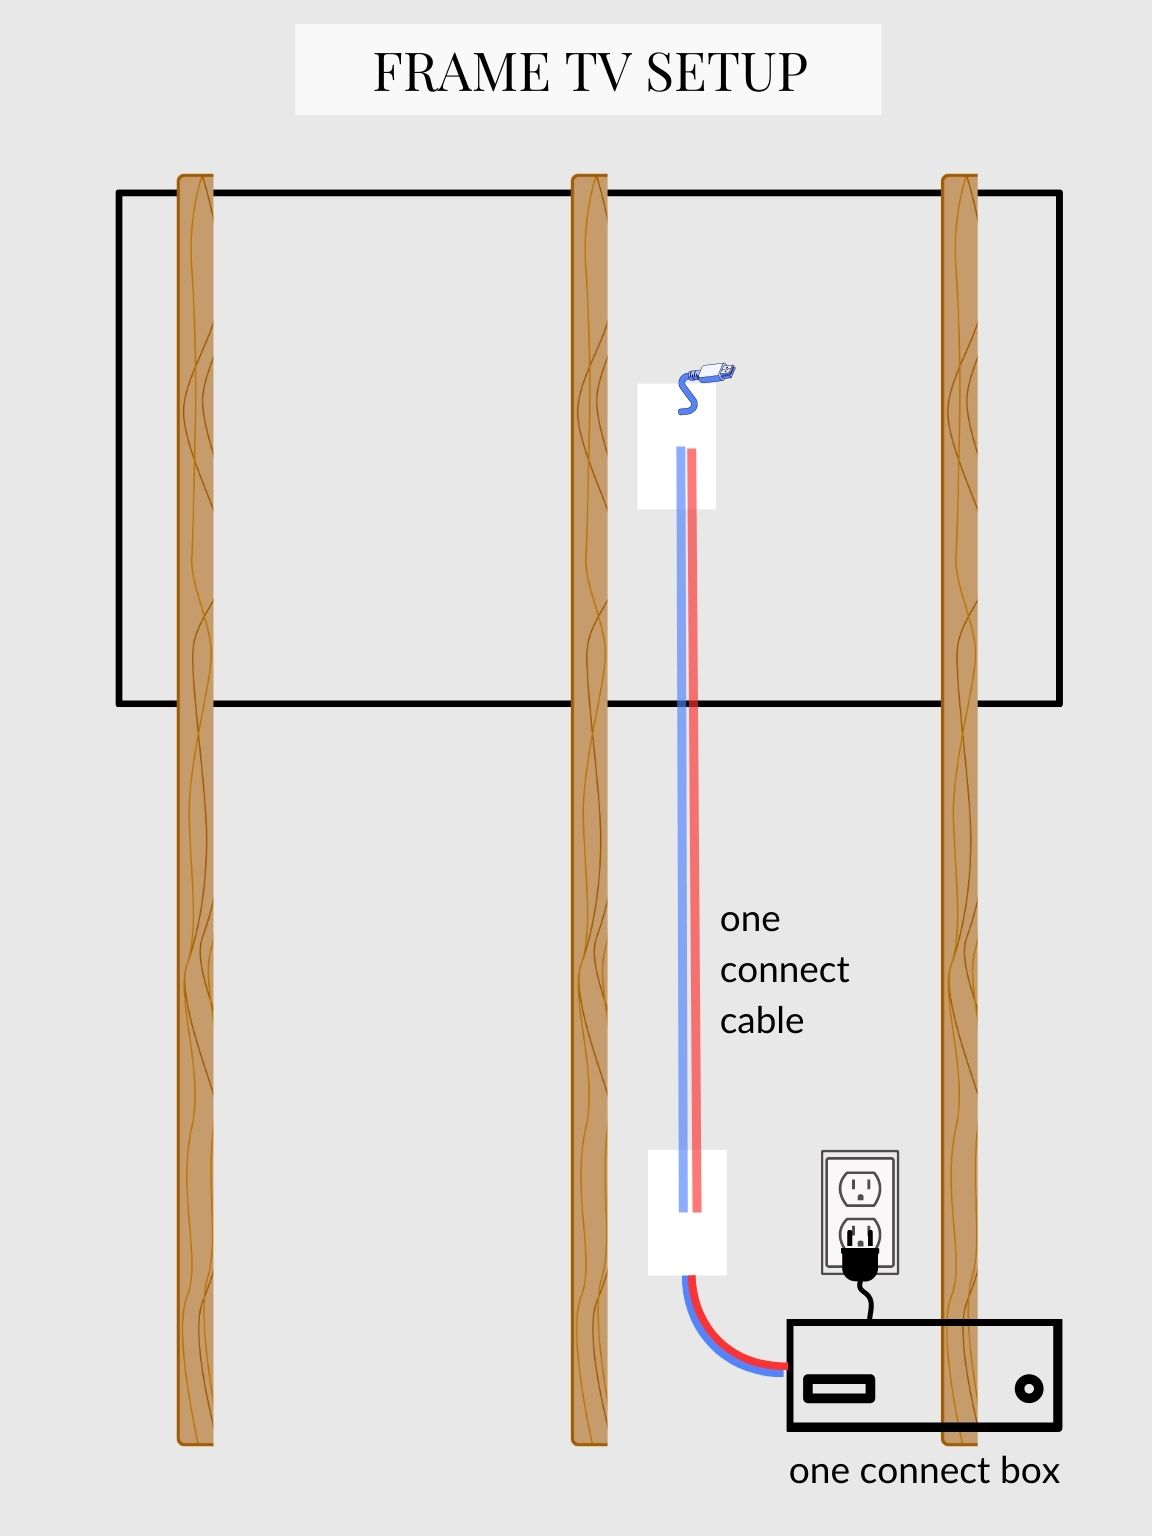 diagram demonstrating how to hide wires in wall with a frame TV setup